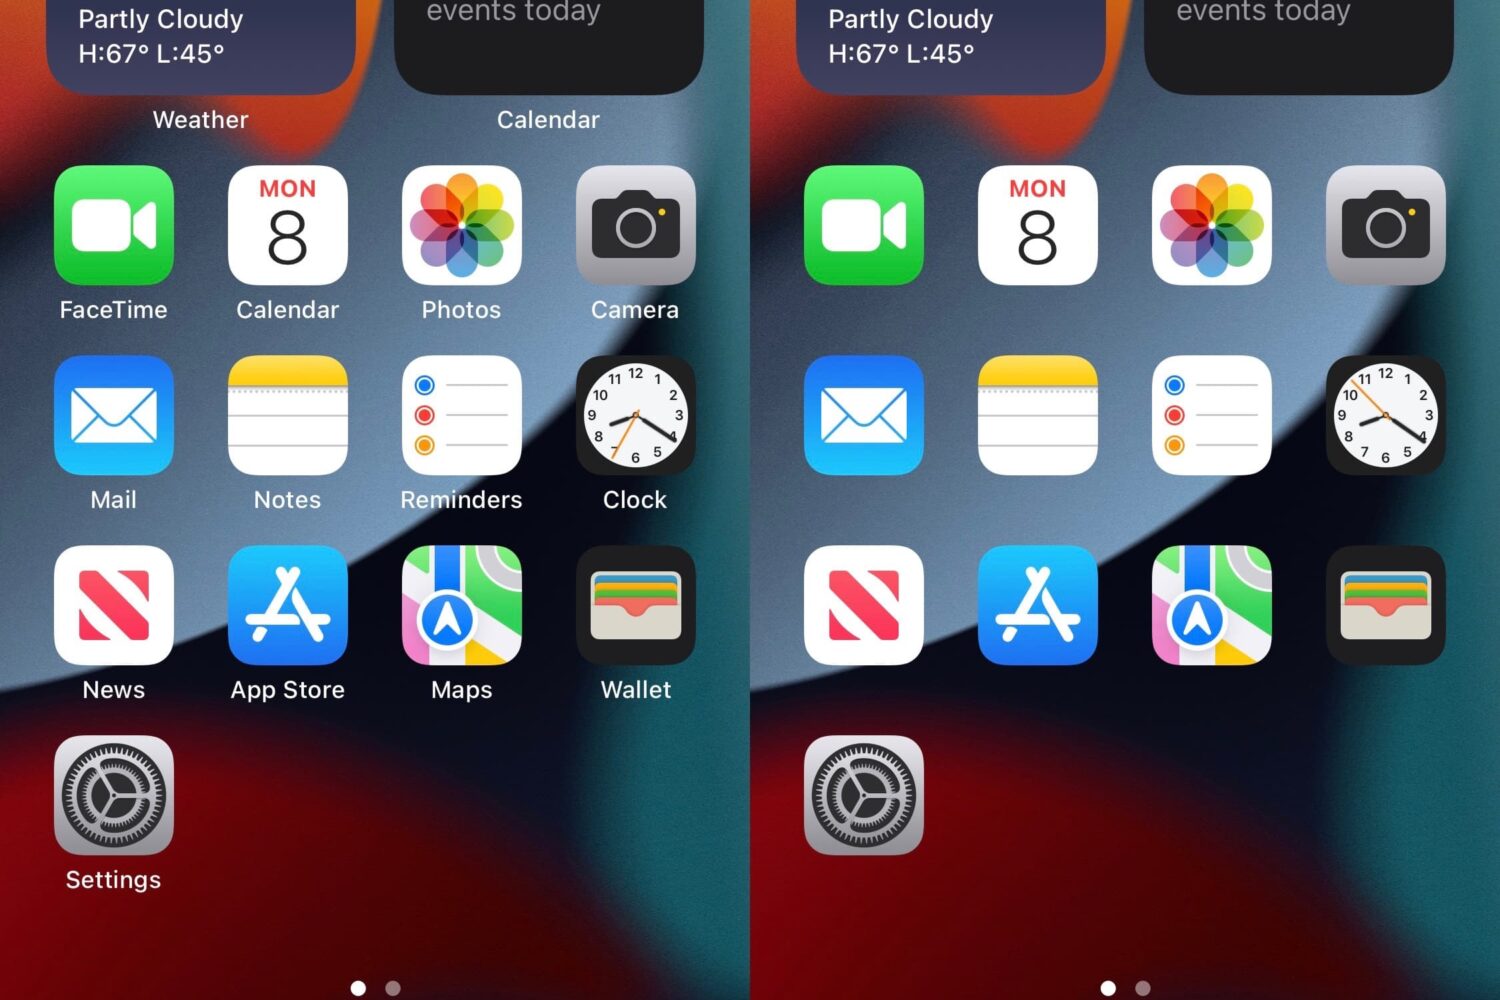 nolabel hides the app icon labels from the Home Screen.